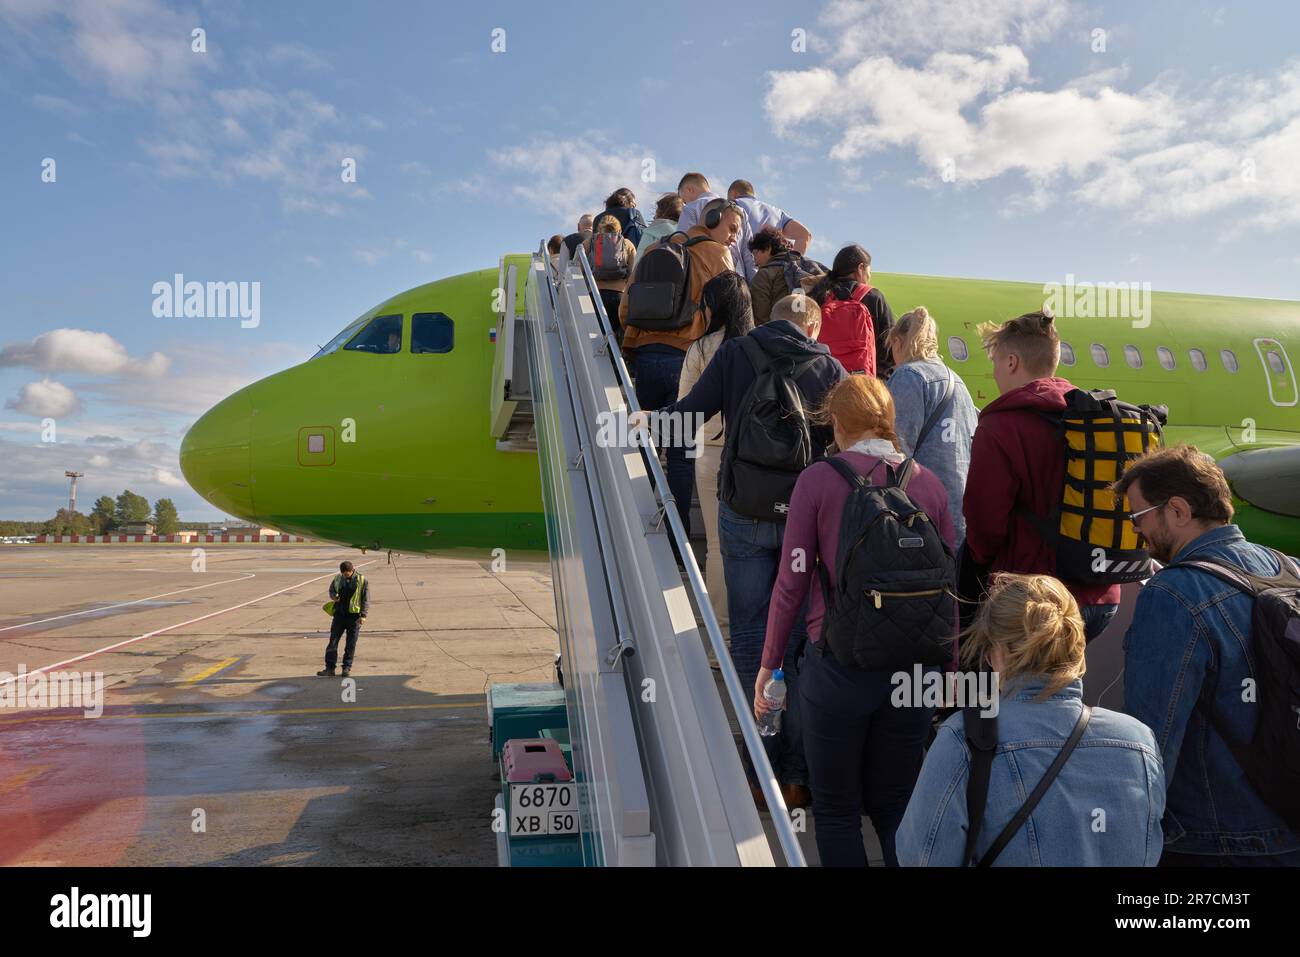 MOSCOW, RUSSIA - CIRCA SEPTEMBER, 2019: people boarding S7 airliner on tarmac at Moscow Domodedovo Airport. Stock Photo